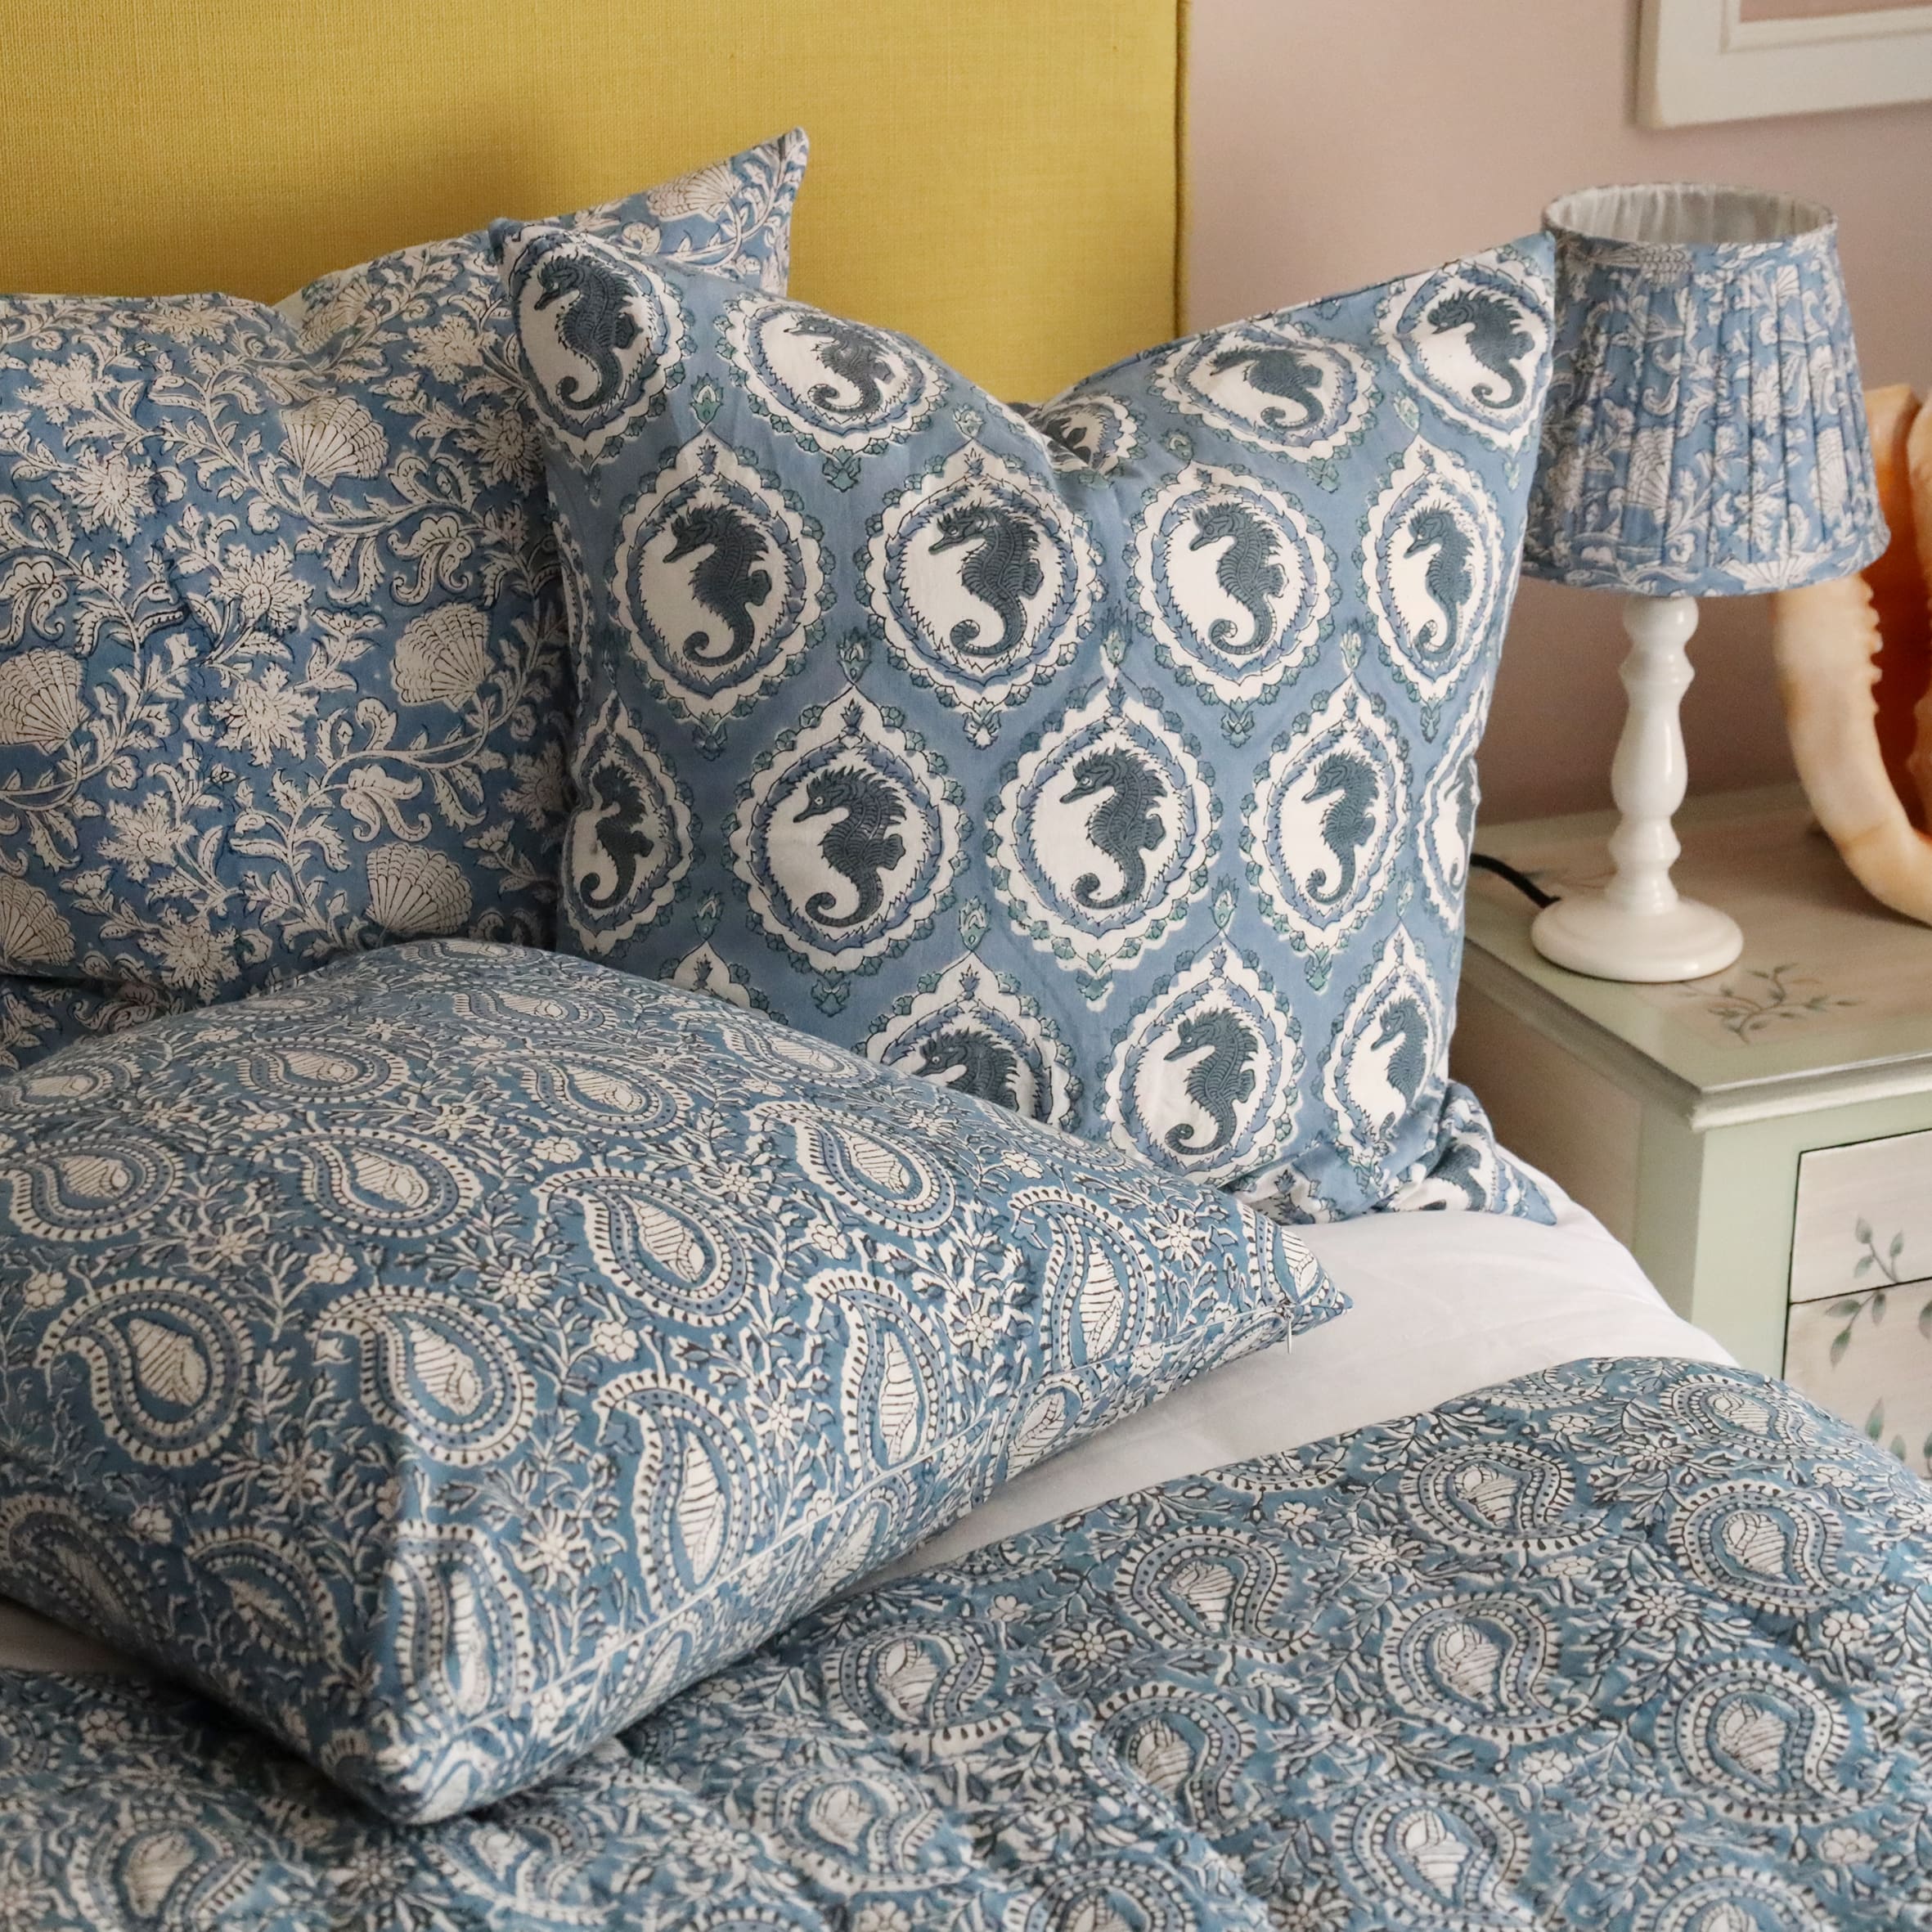 Ocean Blue Seahorse Cameo cushion which is Hand block printed fabric .Behind the cushion is another Handblock printed cushion,both on a bed.Next to the bed is a bedside cabinet beautifully decorated with sea creatures,on that is a lamp base with a handblock printed pleated lampshade. 